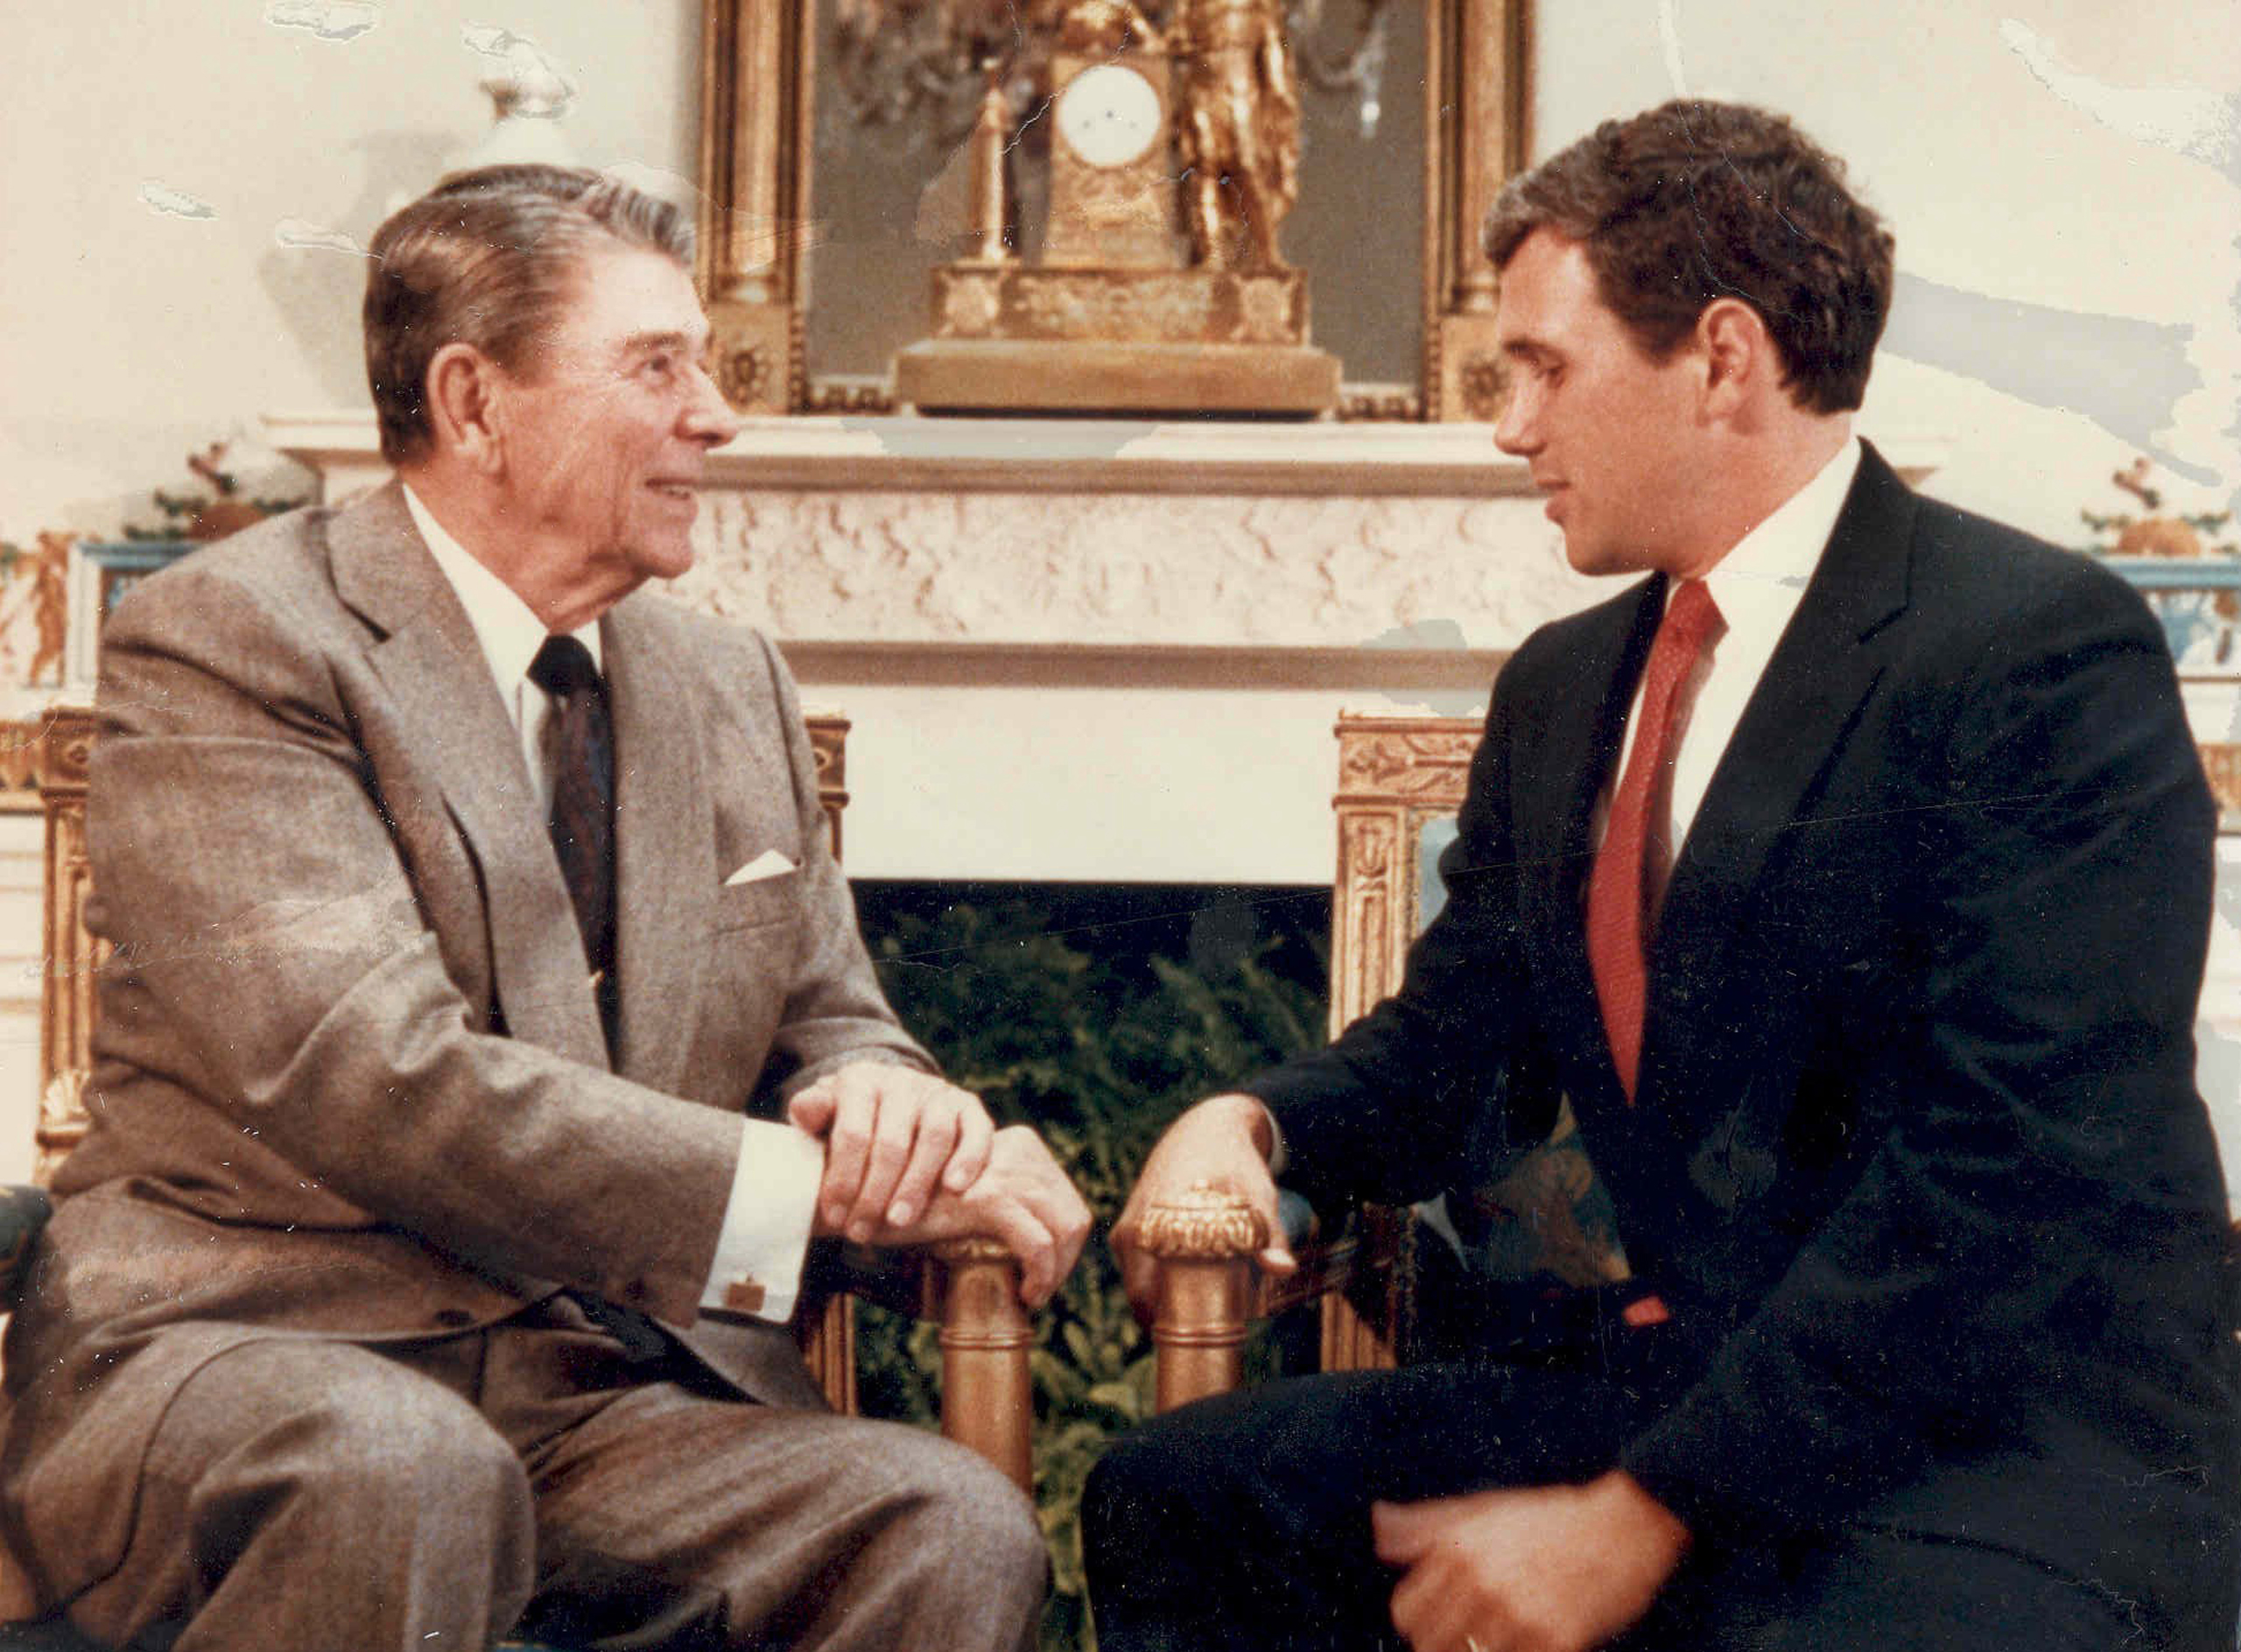 Rep. Mike Pence in the Blue Room meeting former President Ronald Reagan in Aug. 1988.